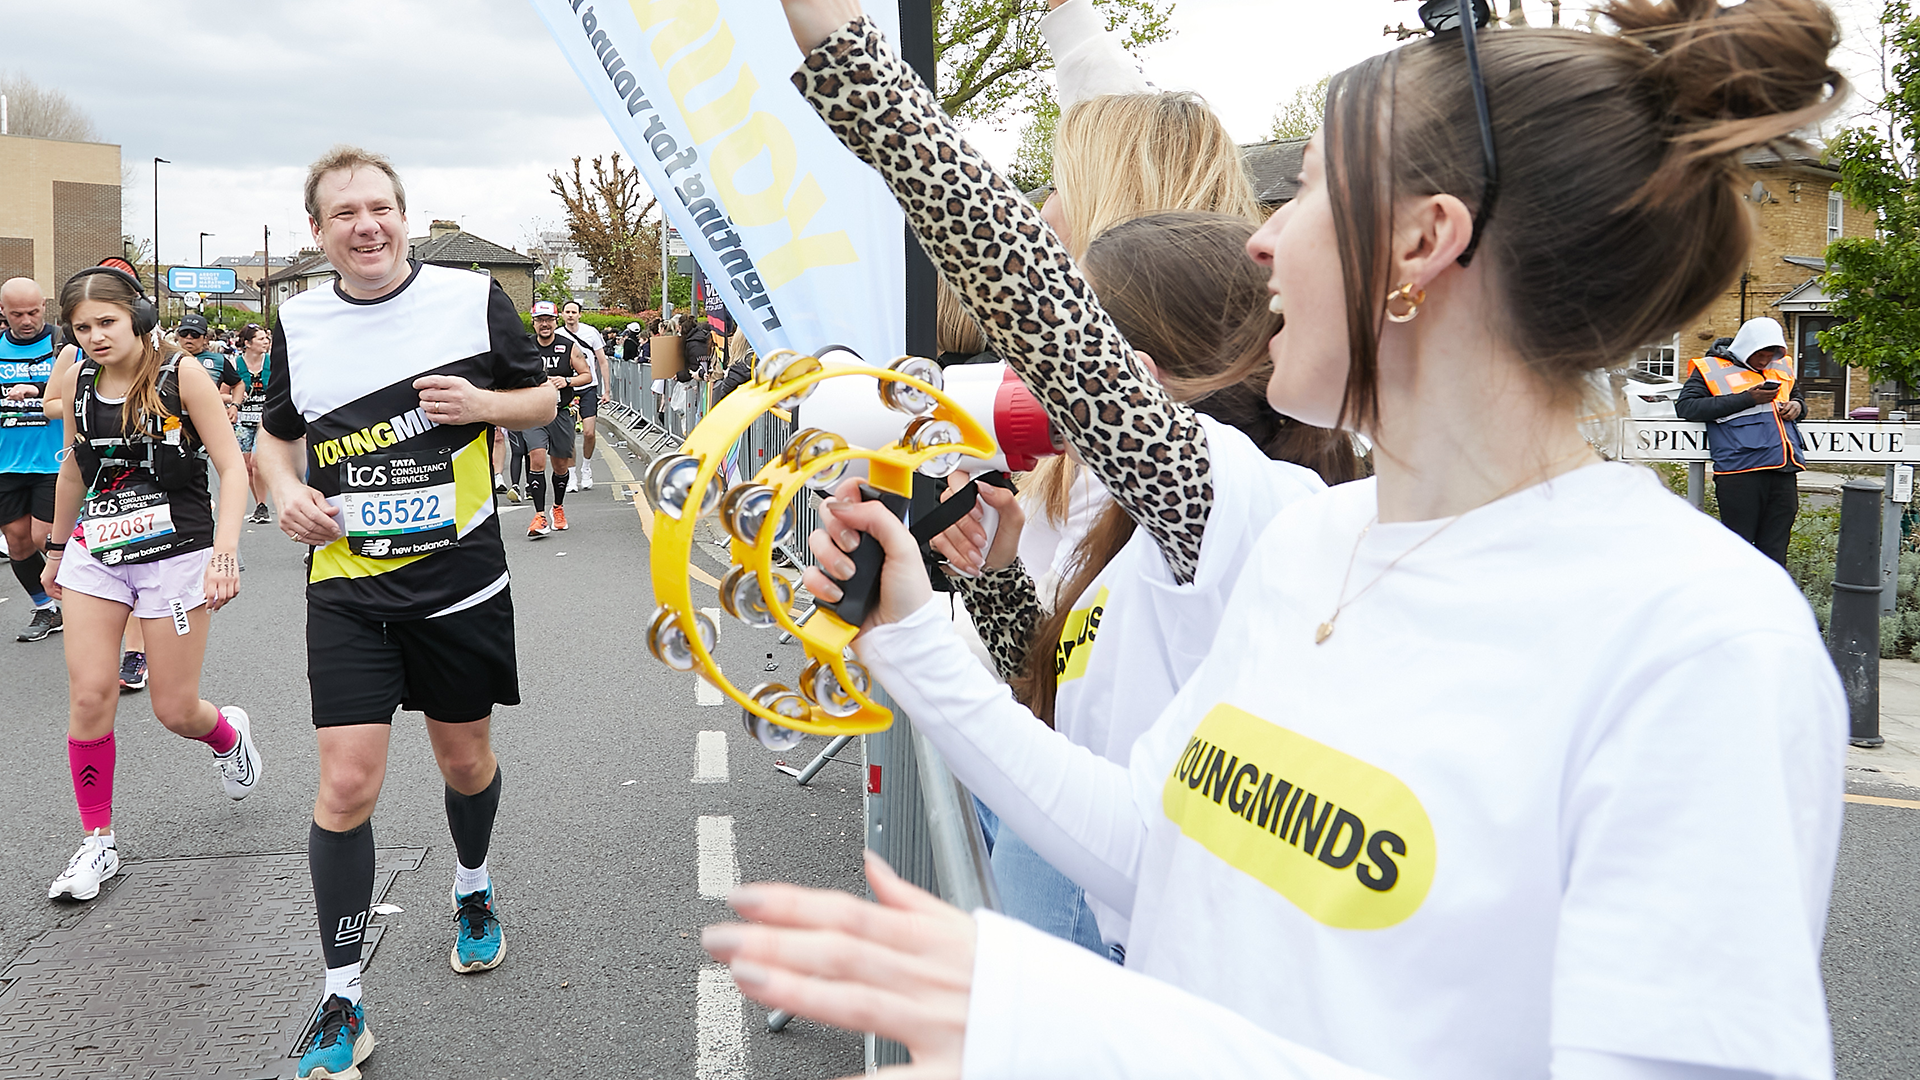 A YoungMinds marathon runner being supported by YoungMinds staff on the side line.